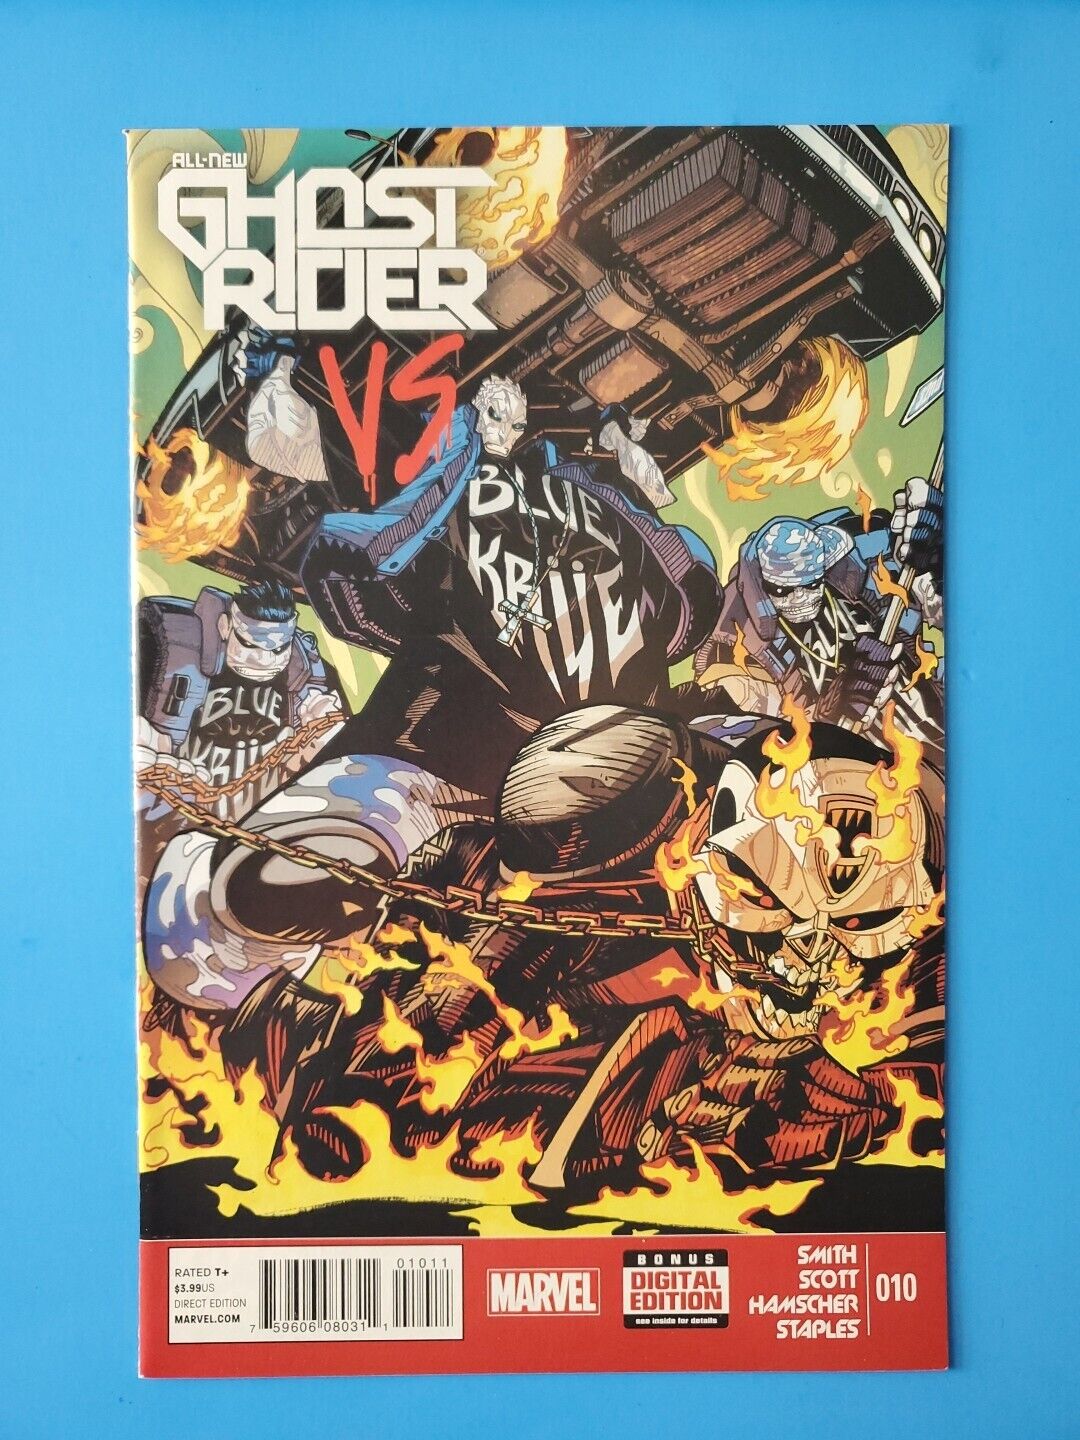 All-New Ghost Rider #10 - Robbie Reyes - Marvel Comics 2015